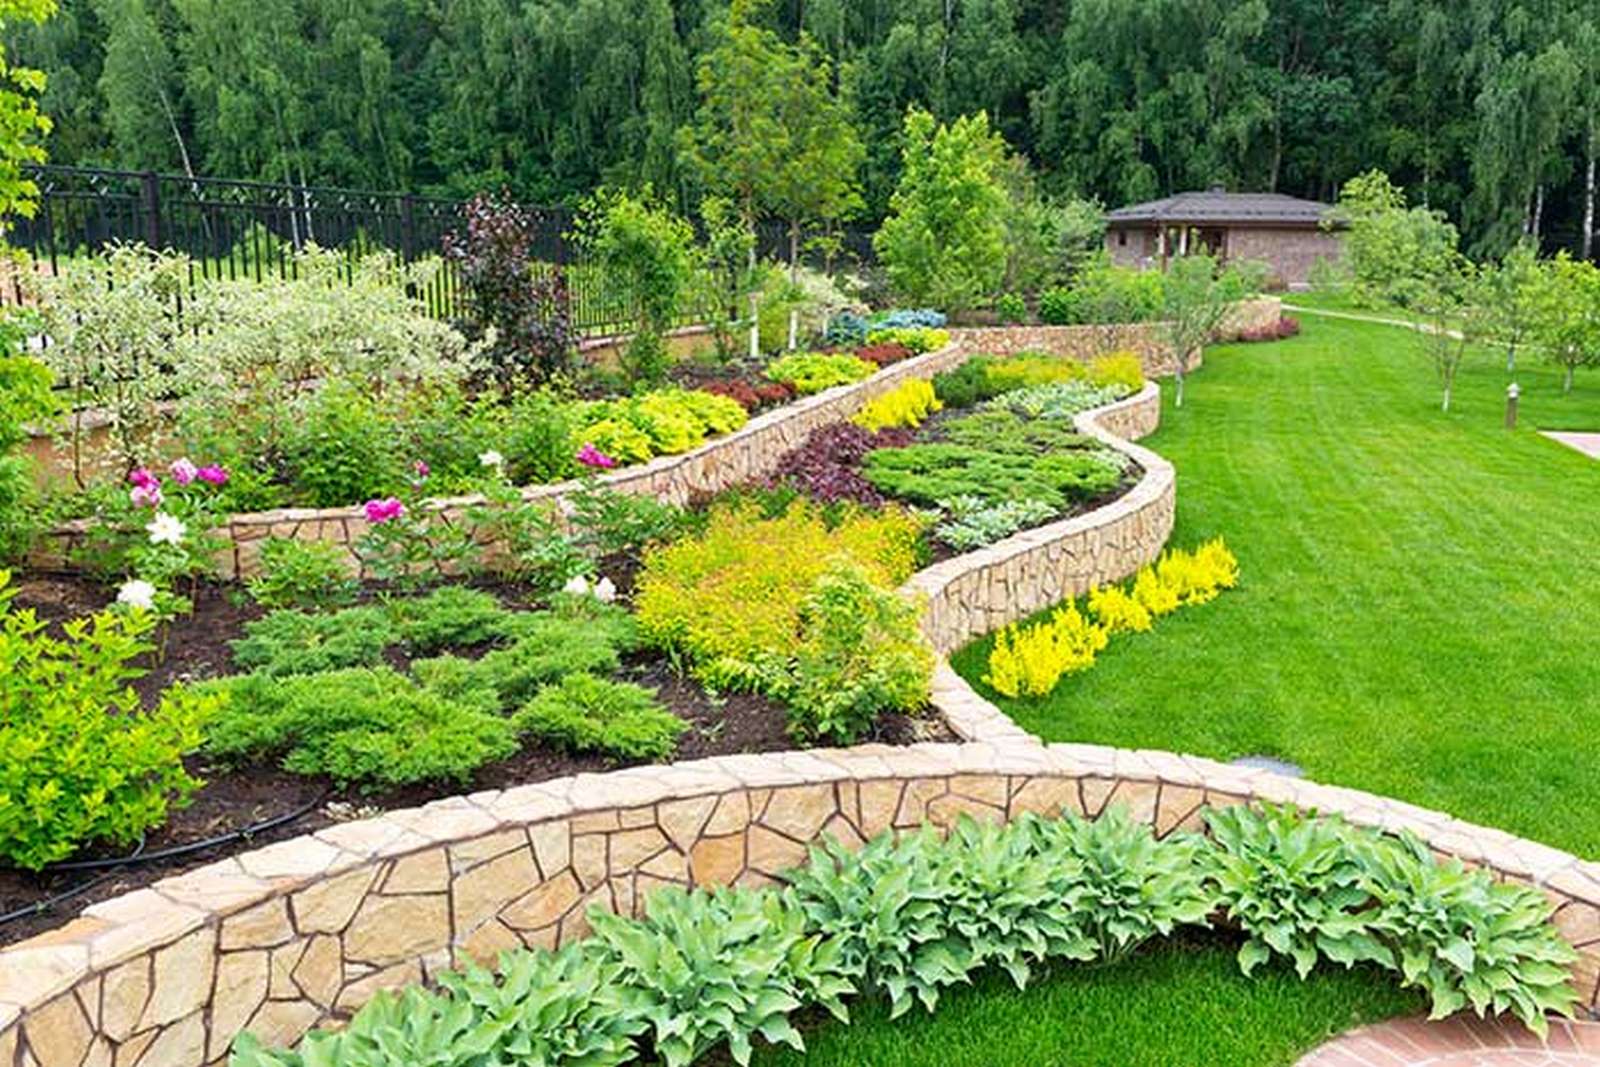 Retaining Walls Add Style and Visual Interest to Front or Backyard